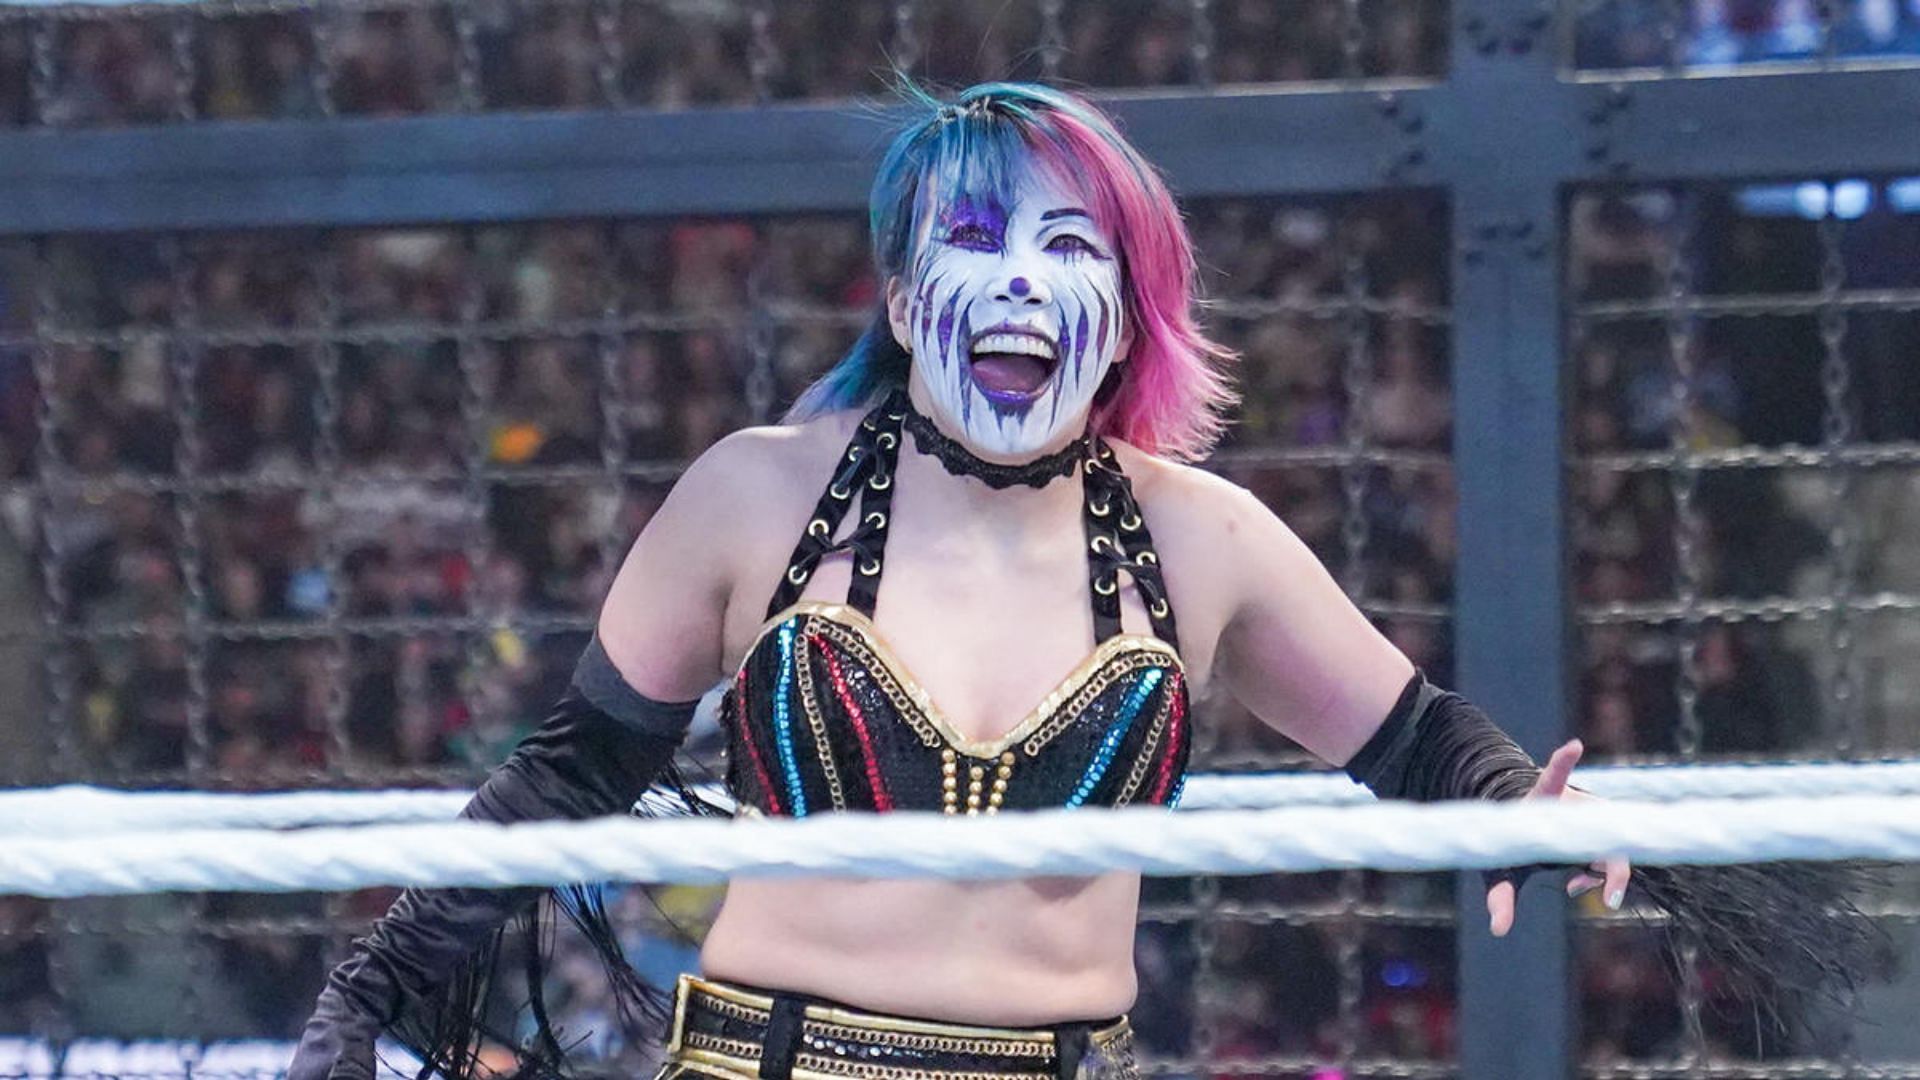 Asuka after winning at Elimination Chamber back in February.